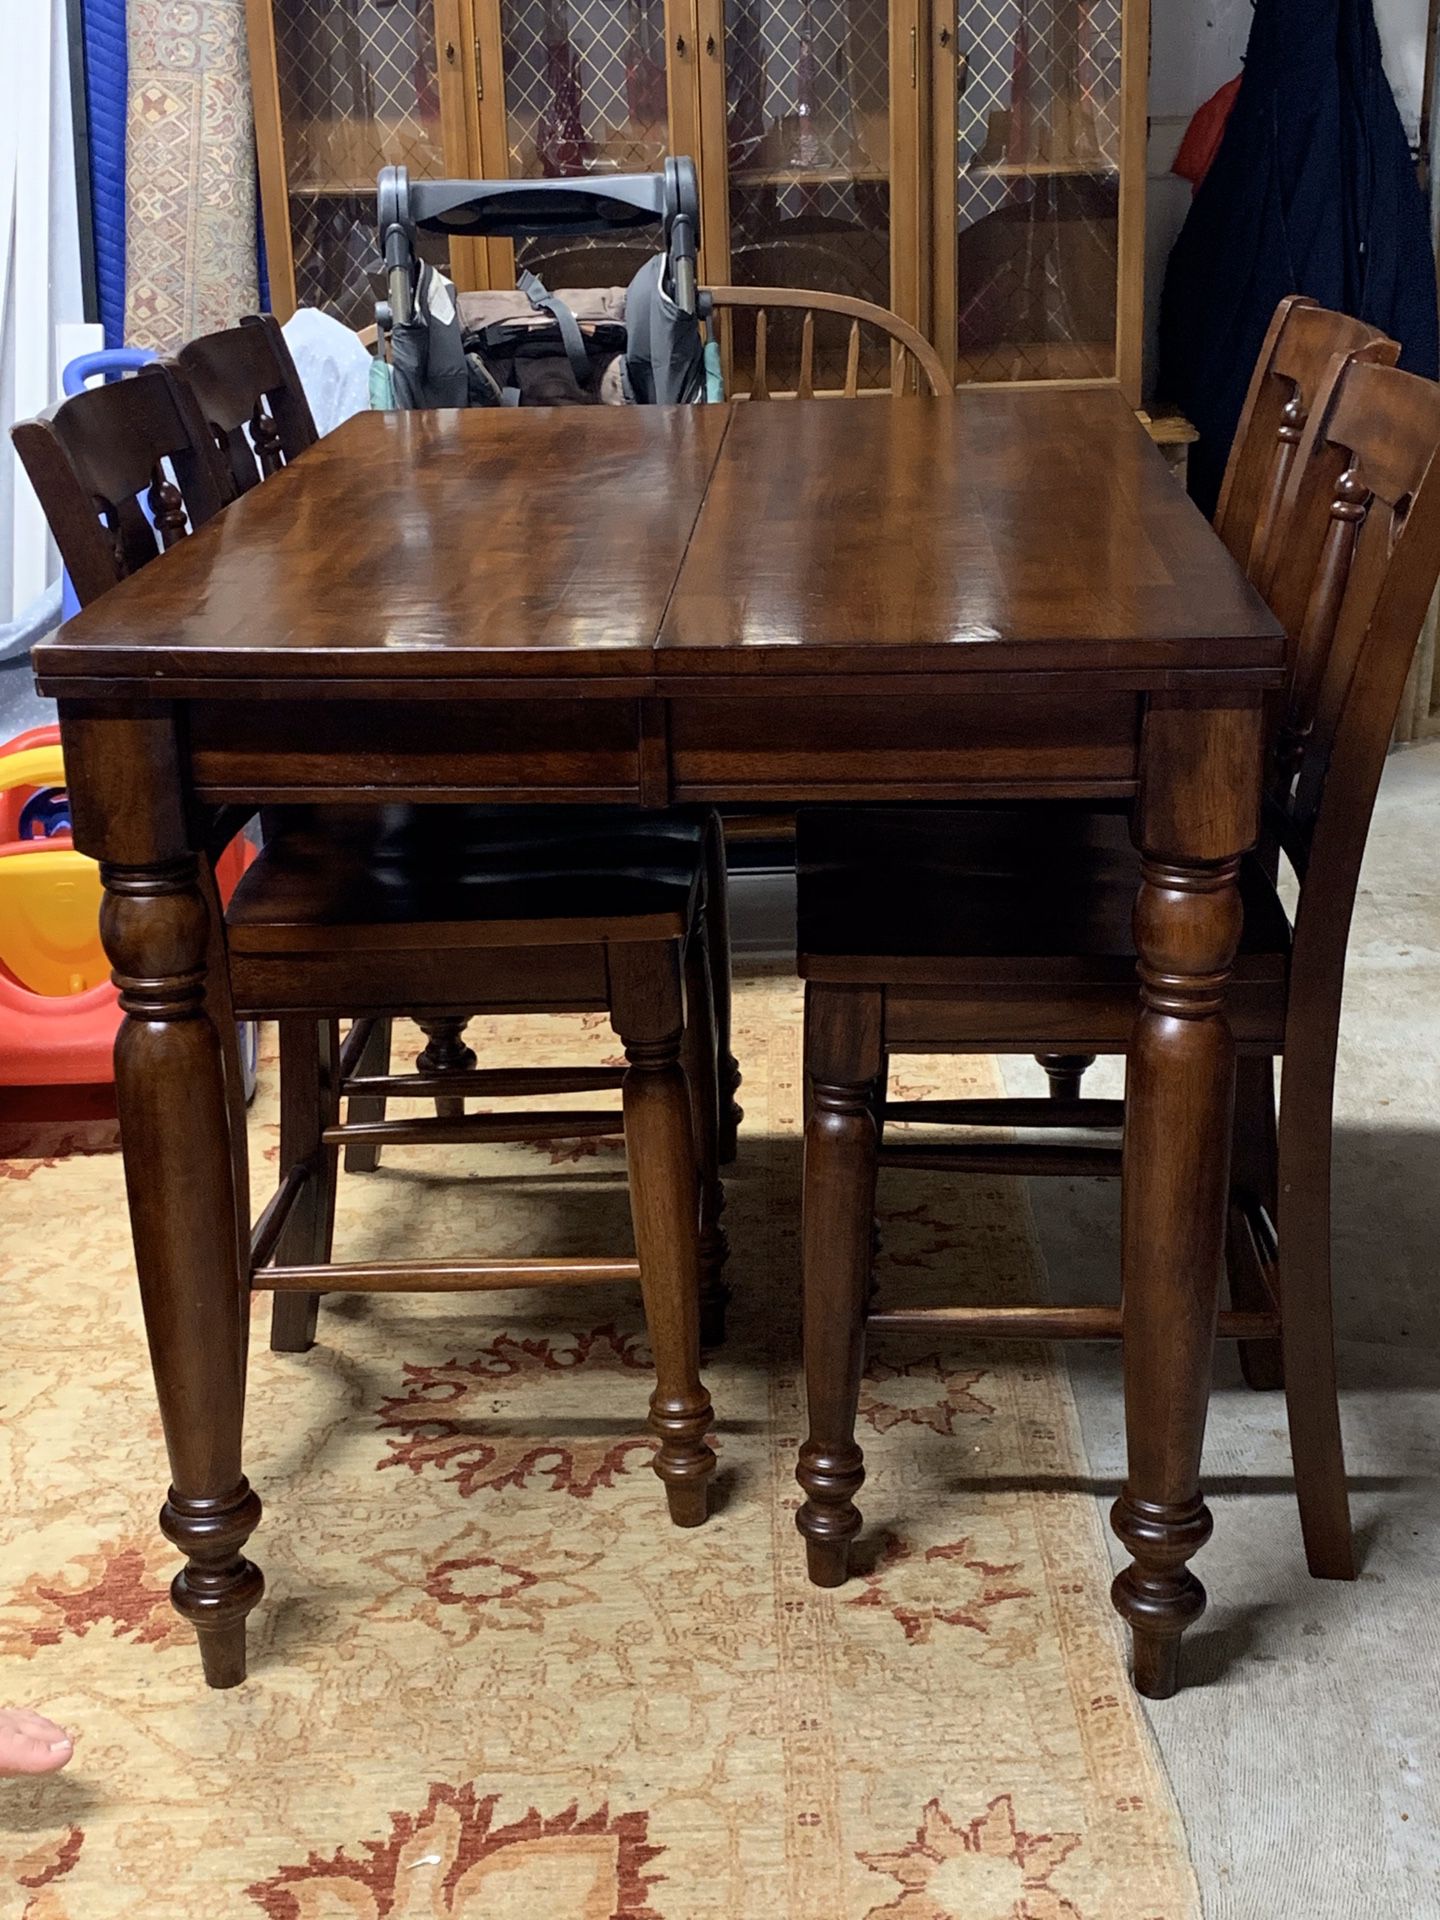 Dining Room Table with leaf